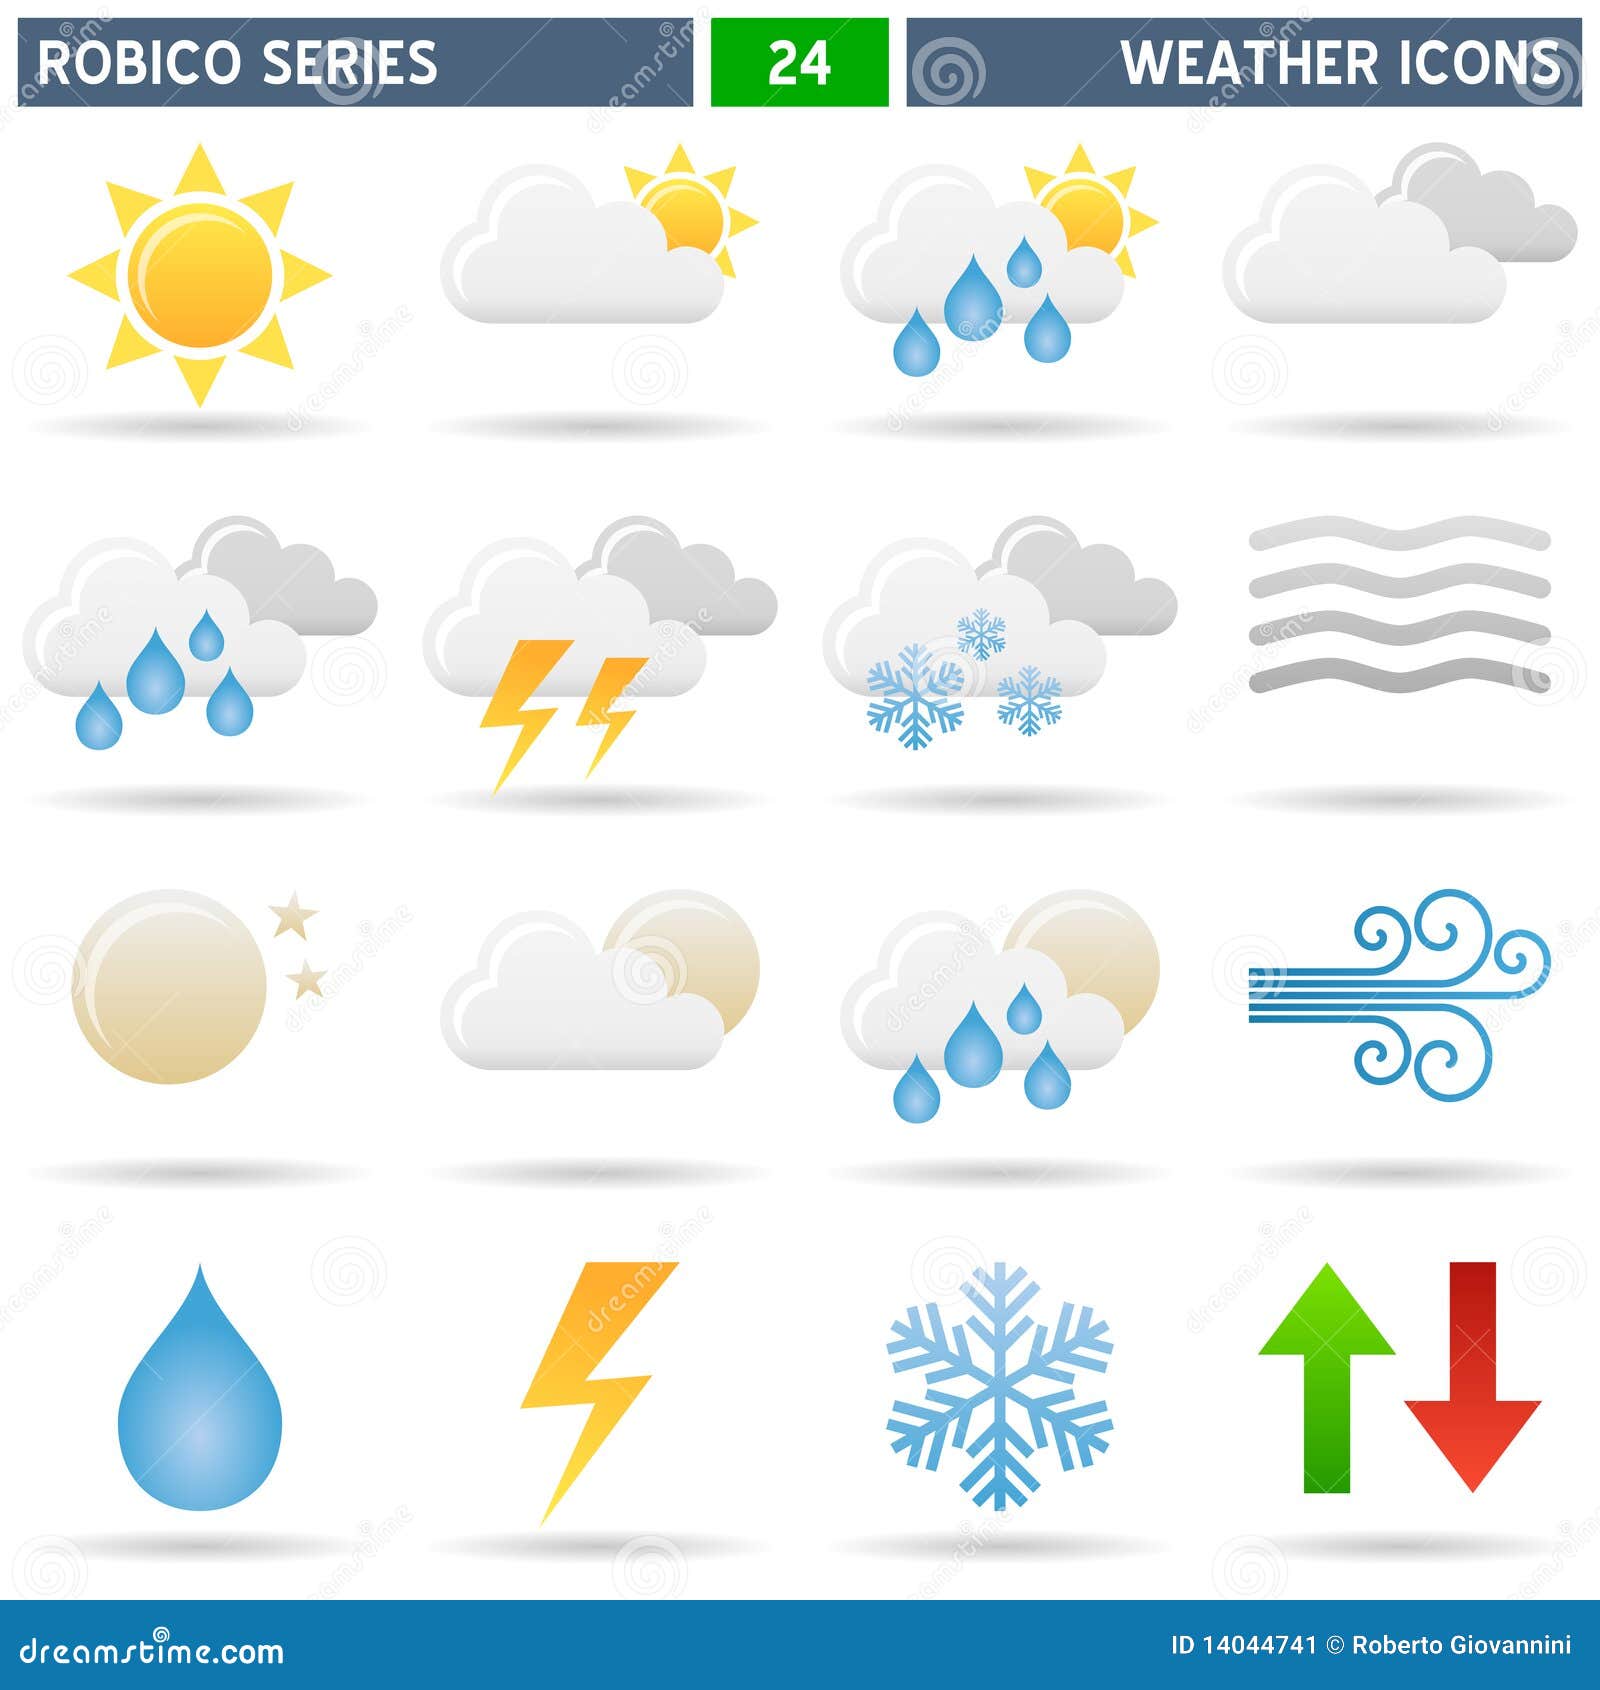 weather icons - robico series